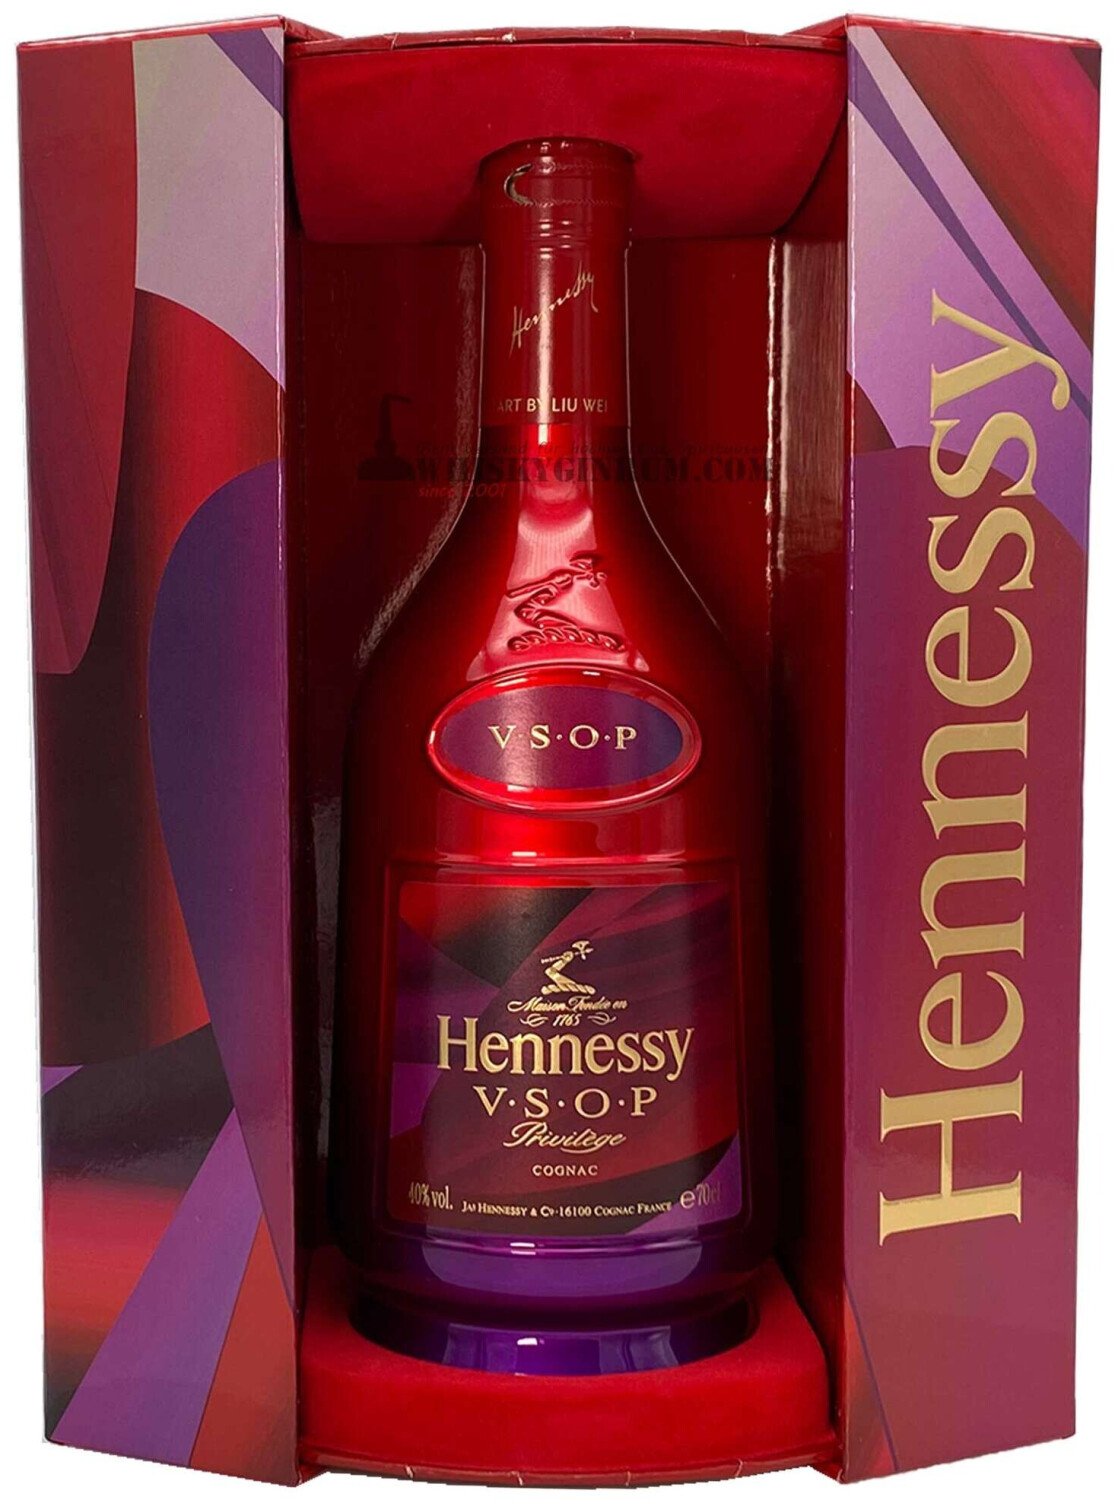 Hennessy VSOP Privilege Lunar New Year 2021 Limited Edition by Liu Wei